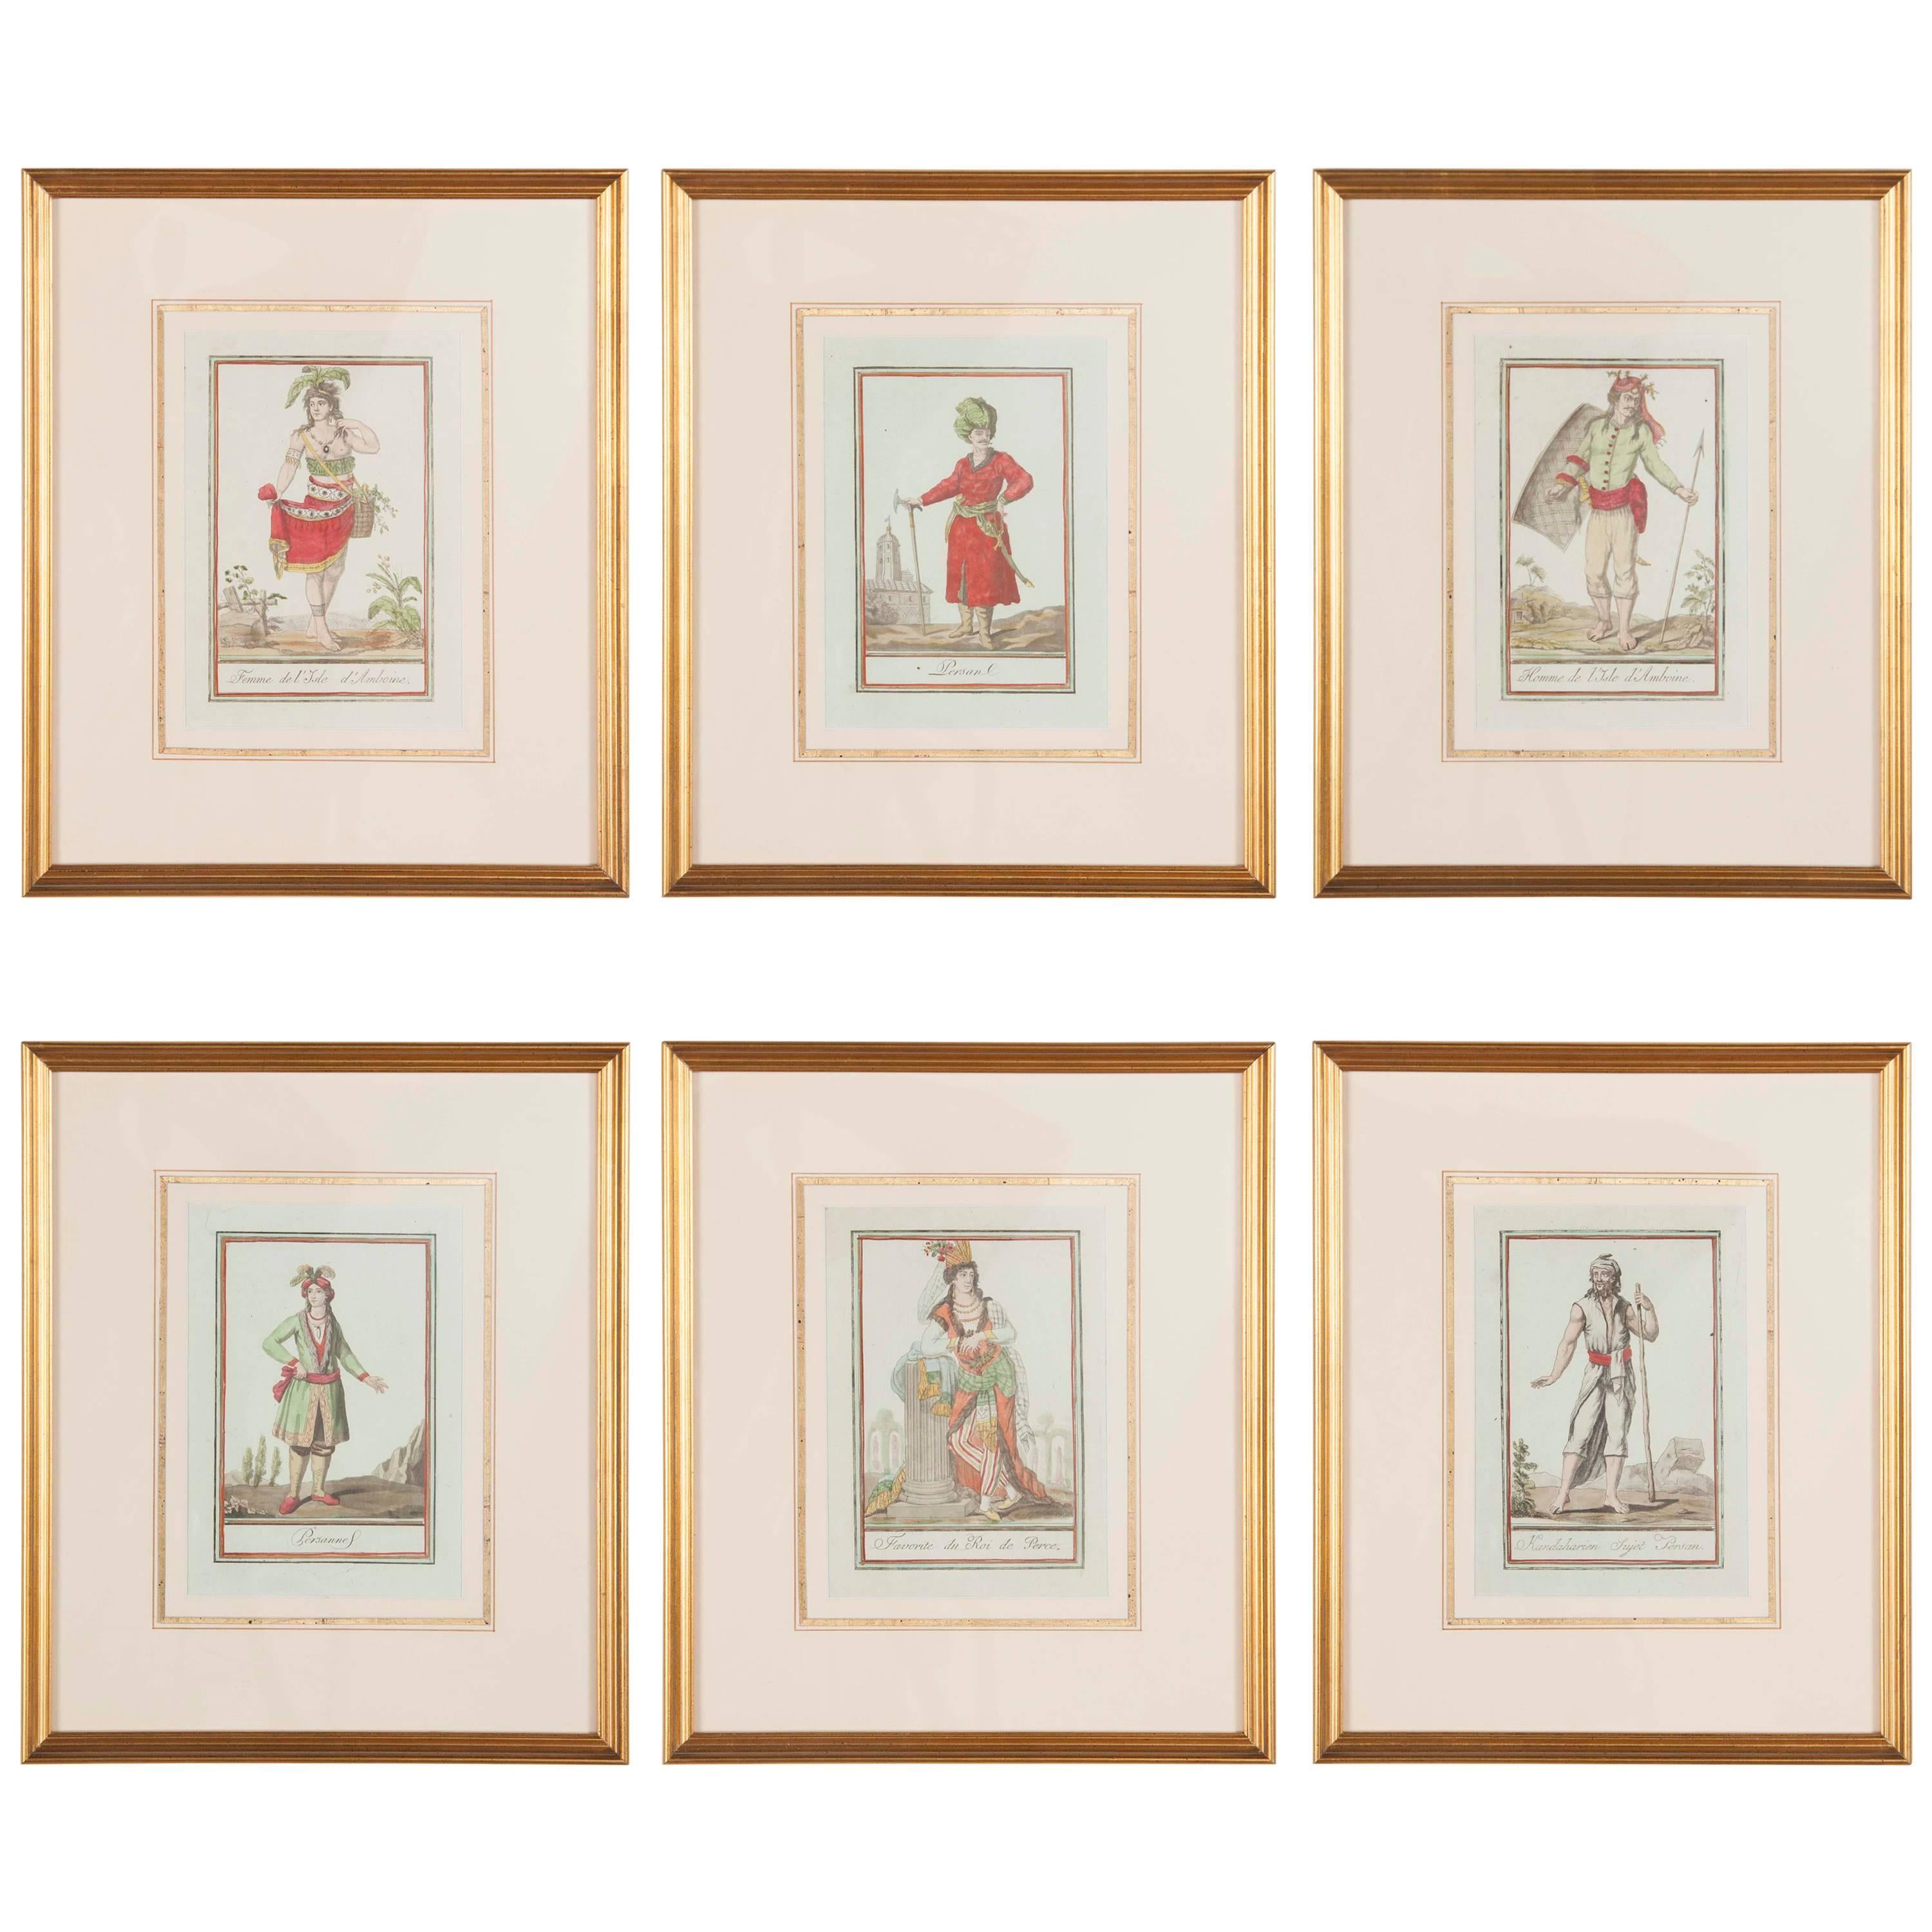 Set of Six Colored Engravings 'Costumes of Various Countries', 18th Century